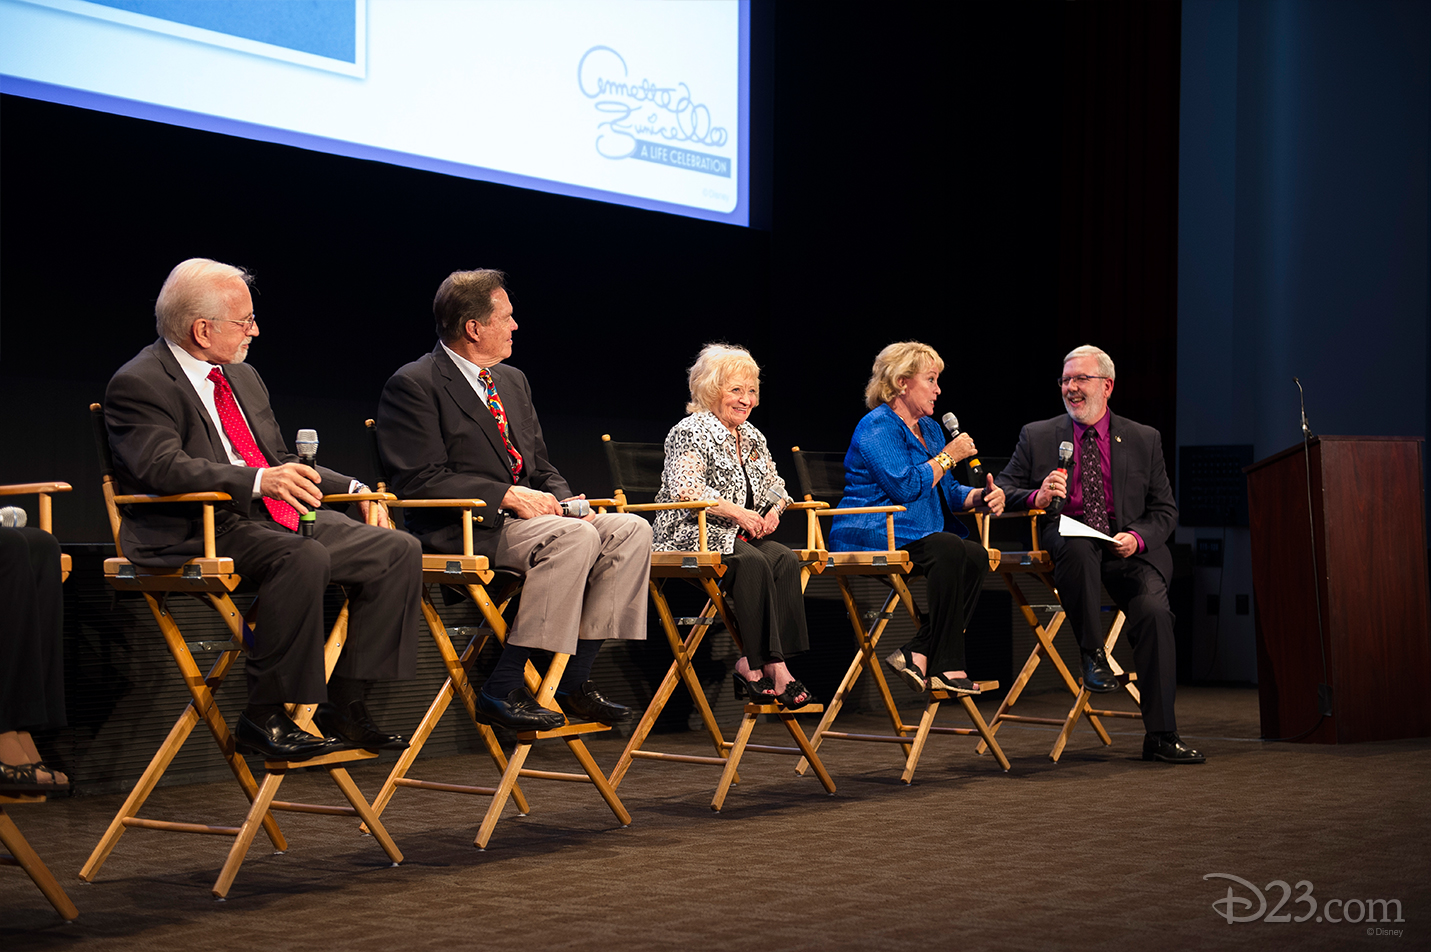 Original Mouseketeer Sherry Alberoni shares a fun memory of Annette with Leonard Maltin and guests at “Annette Funicello: A Life Celebration.”